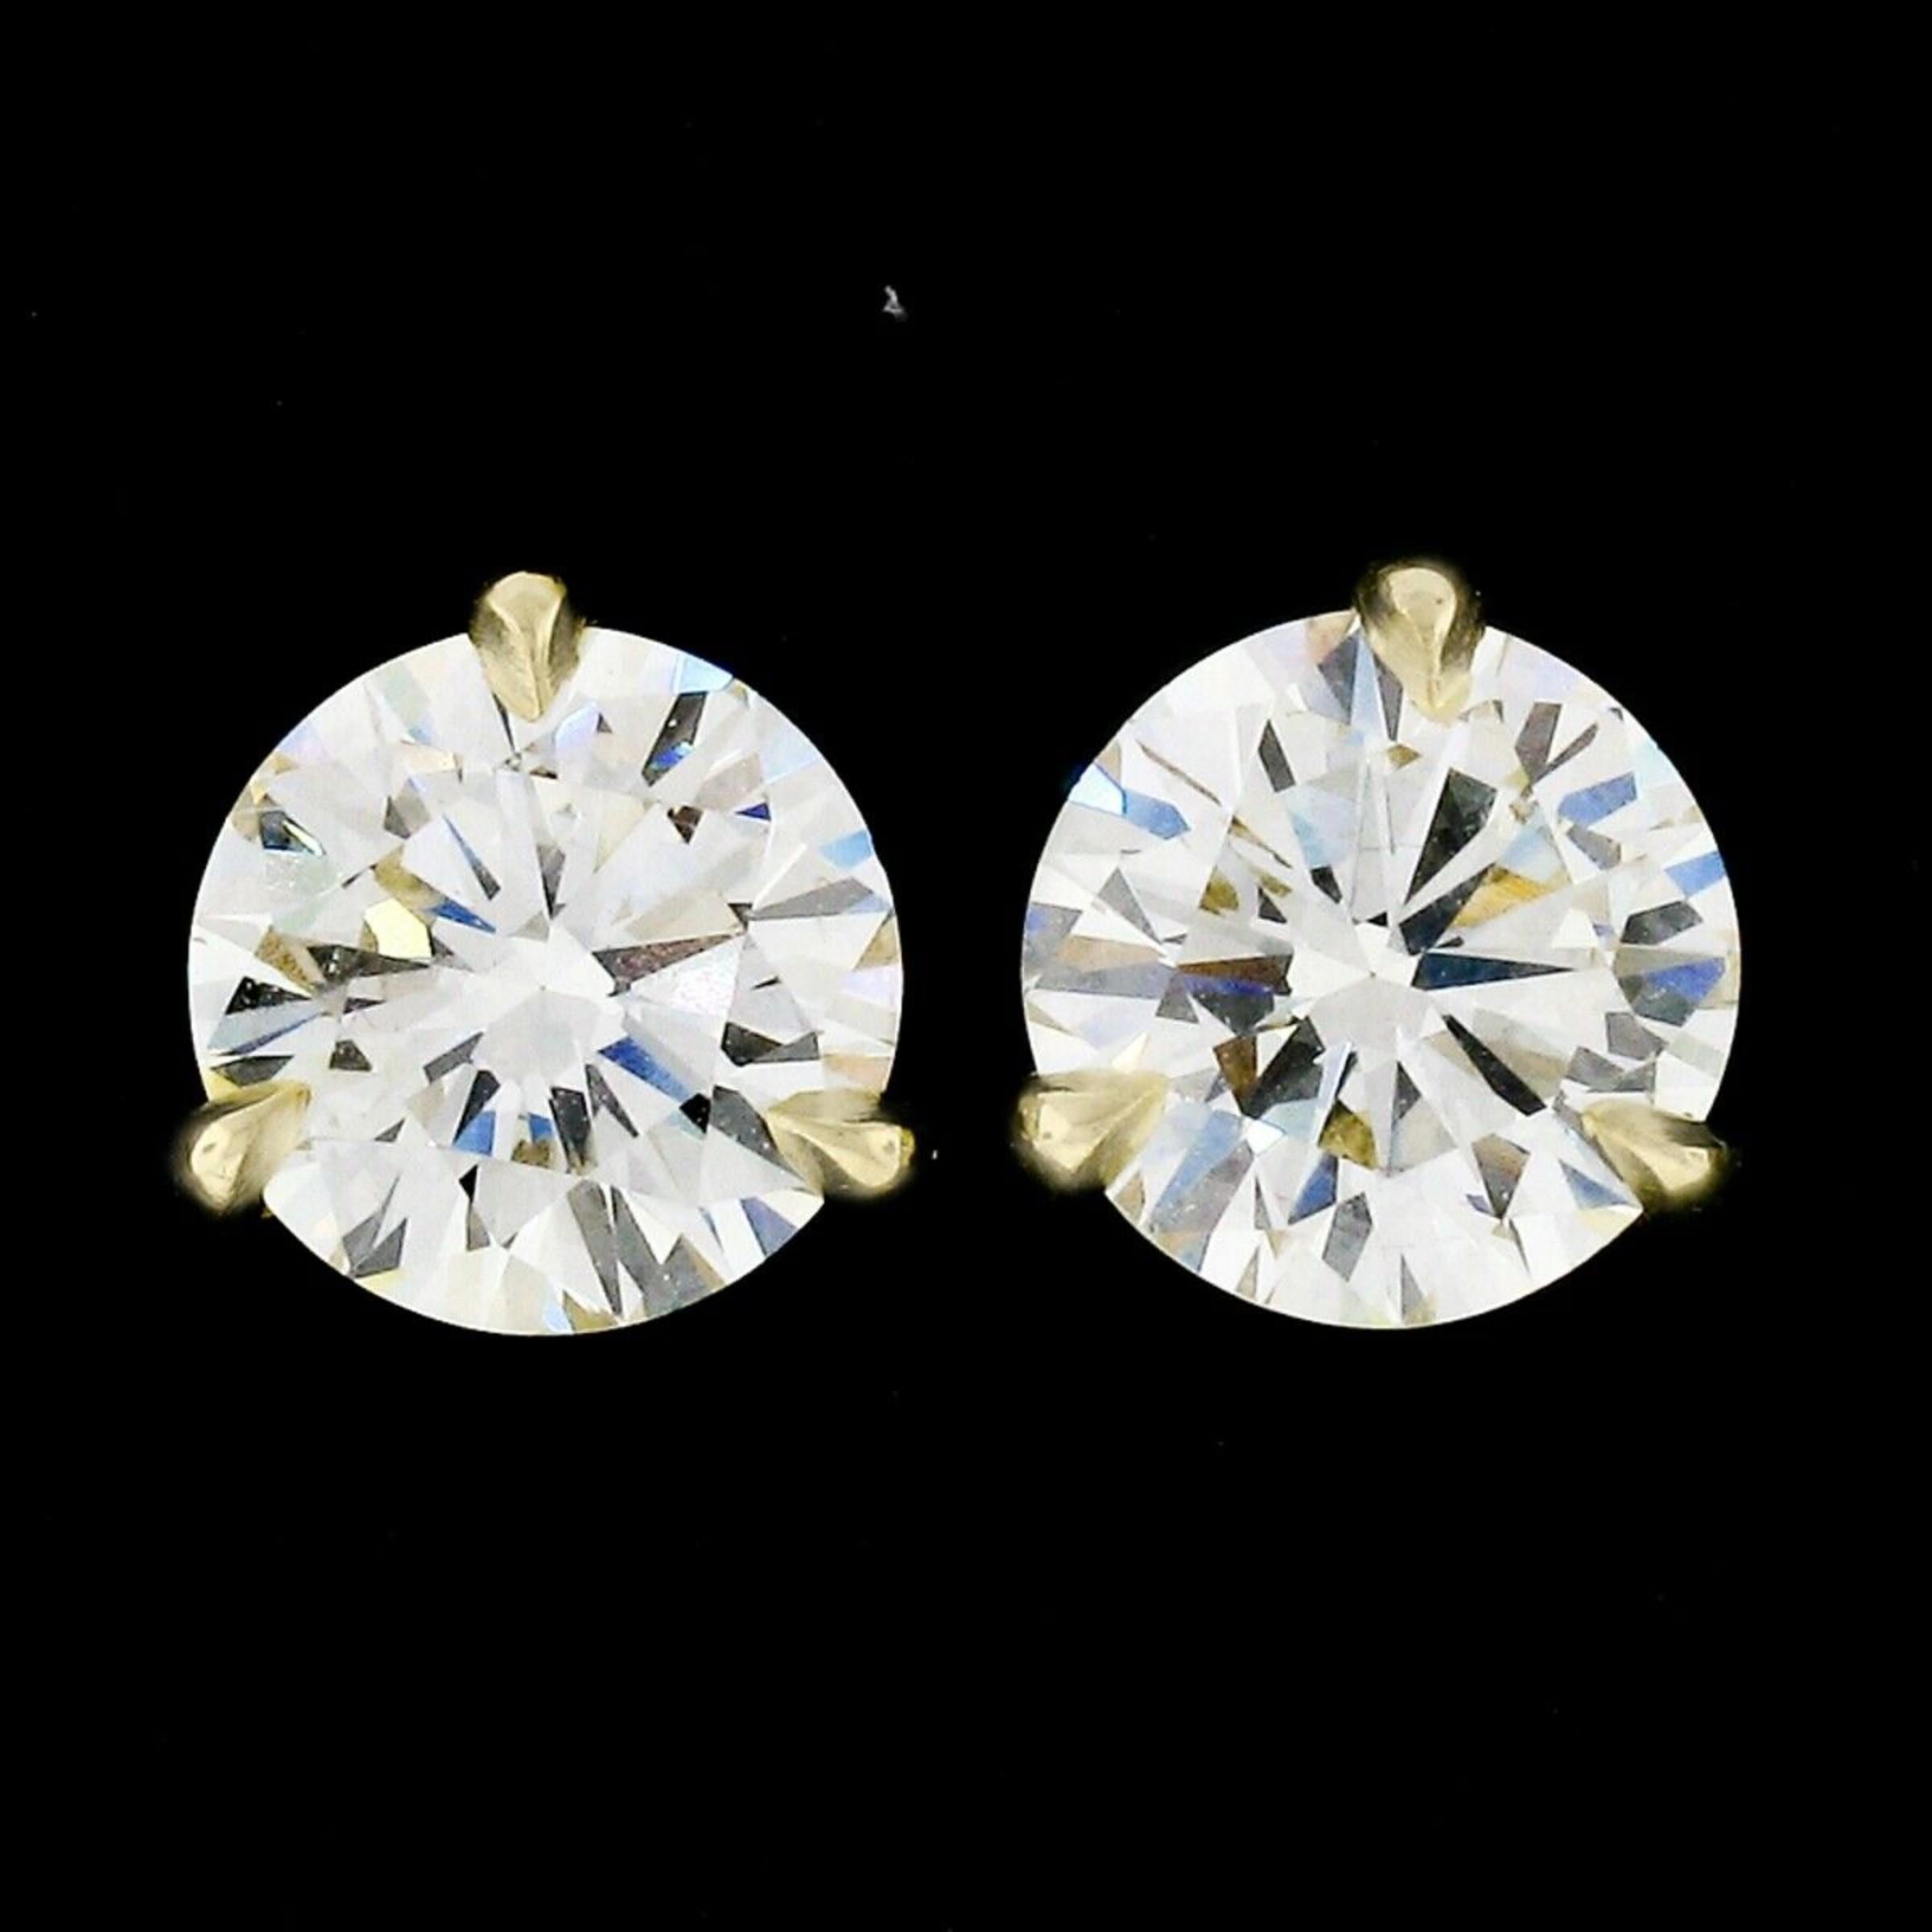 Here we have a stunning pair of large diamond stud earrings which are newly and very well crafted in solid 18k yellow gold. The earrings feature 2 gorgeous, fine quality diamonds having near colorless K/L color, with super clean VVS2/VS1 clarity,